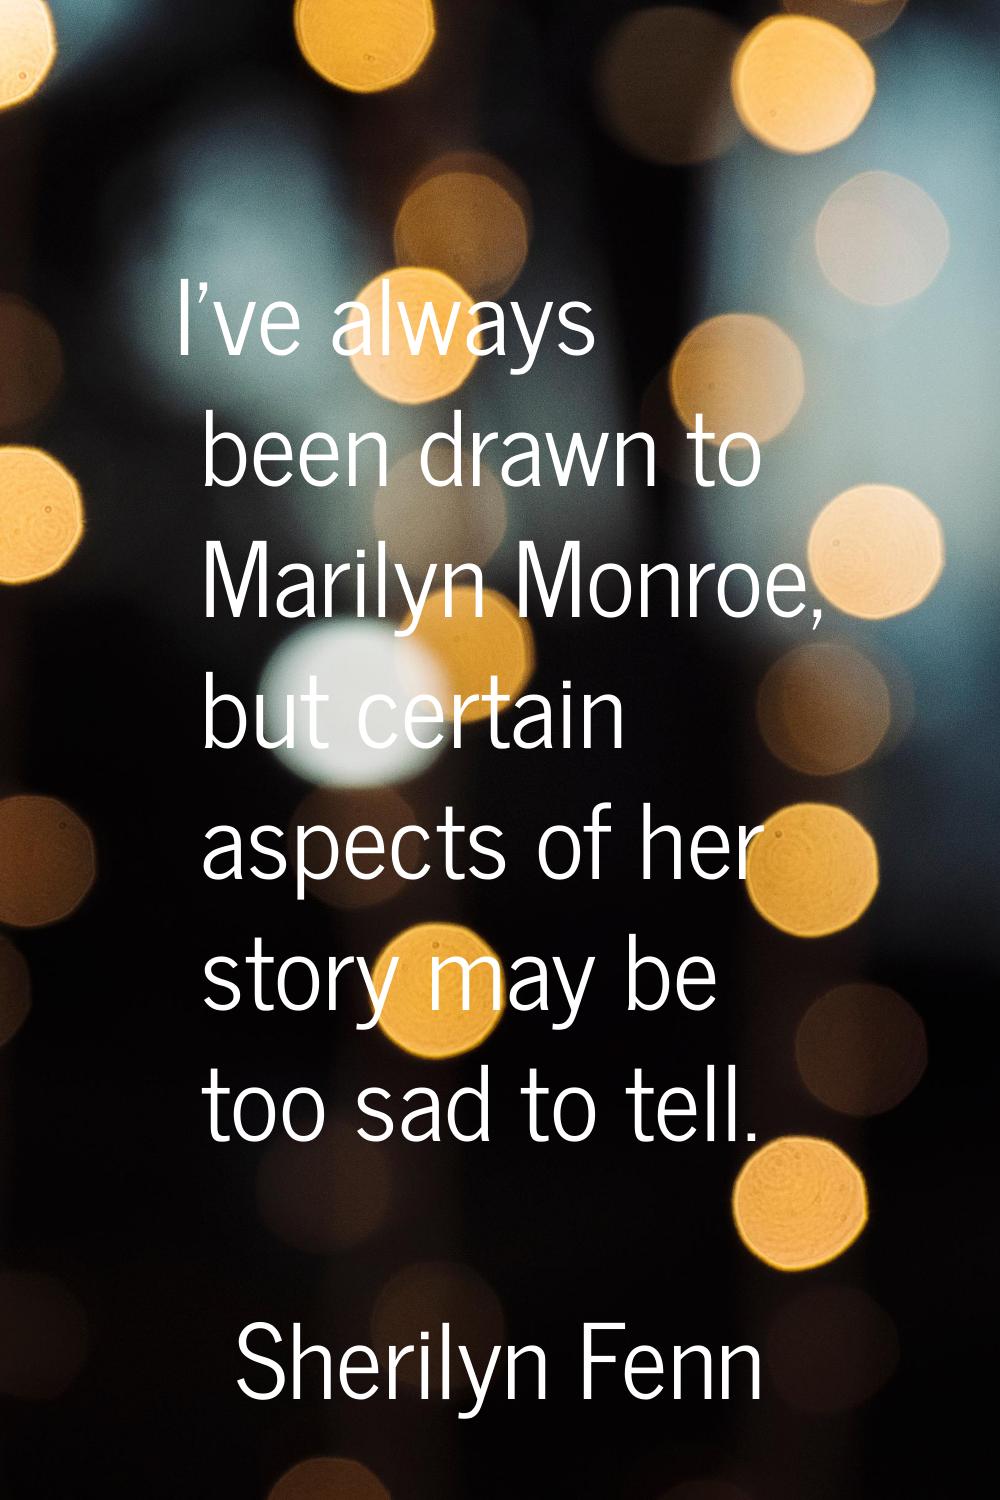 I've always been drawn to Marilyn Monroe, but certain aspects of her story may be too sad to tell.